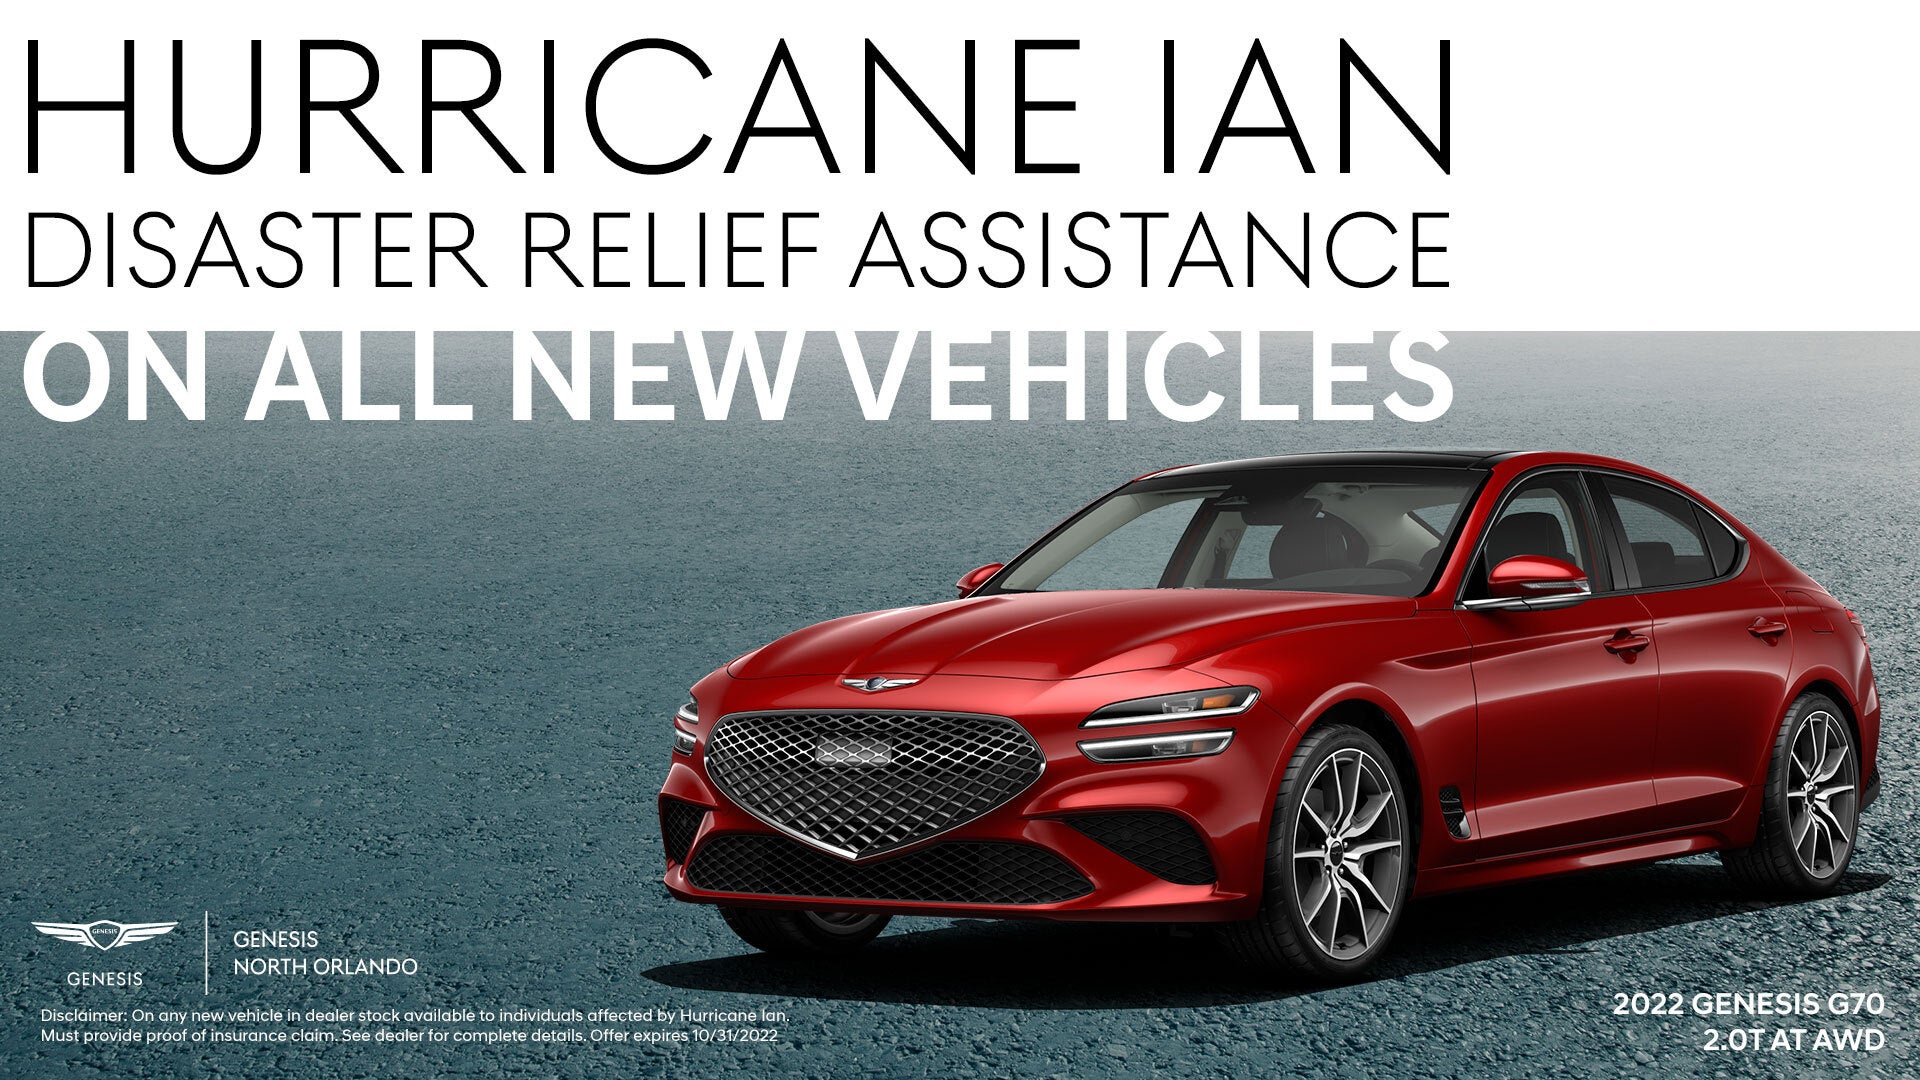 Hurricane Ian Disaster Relief Assistance on all new vehicles